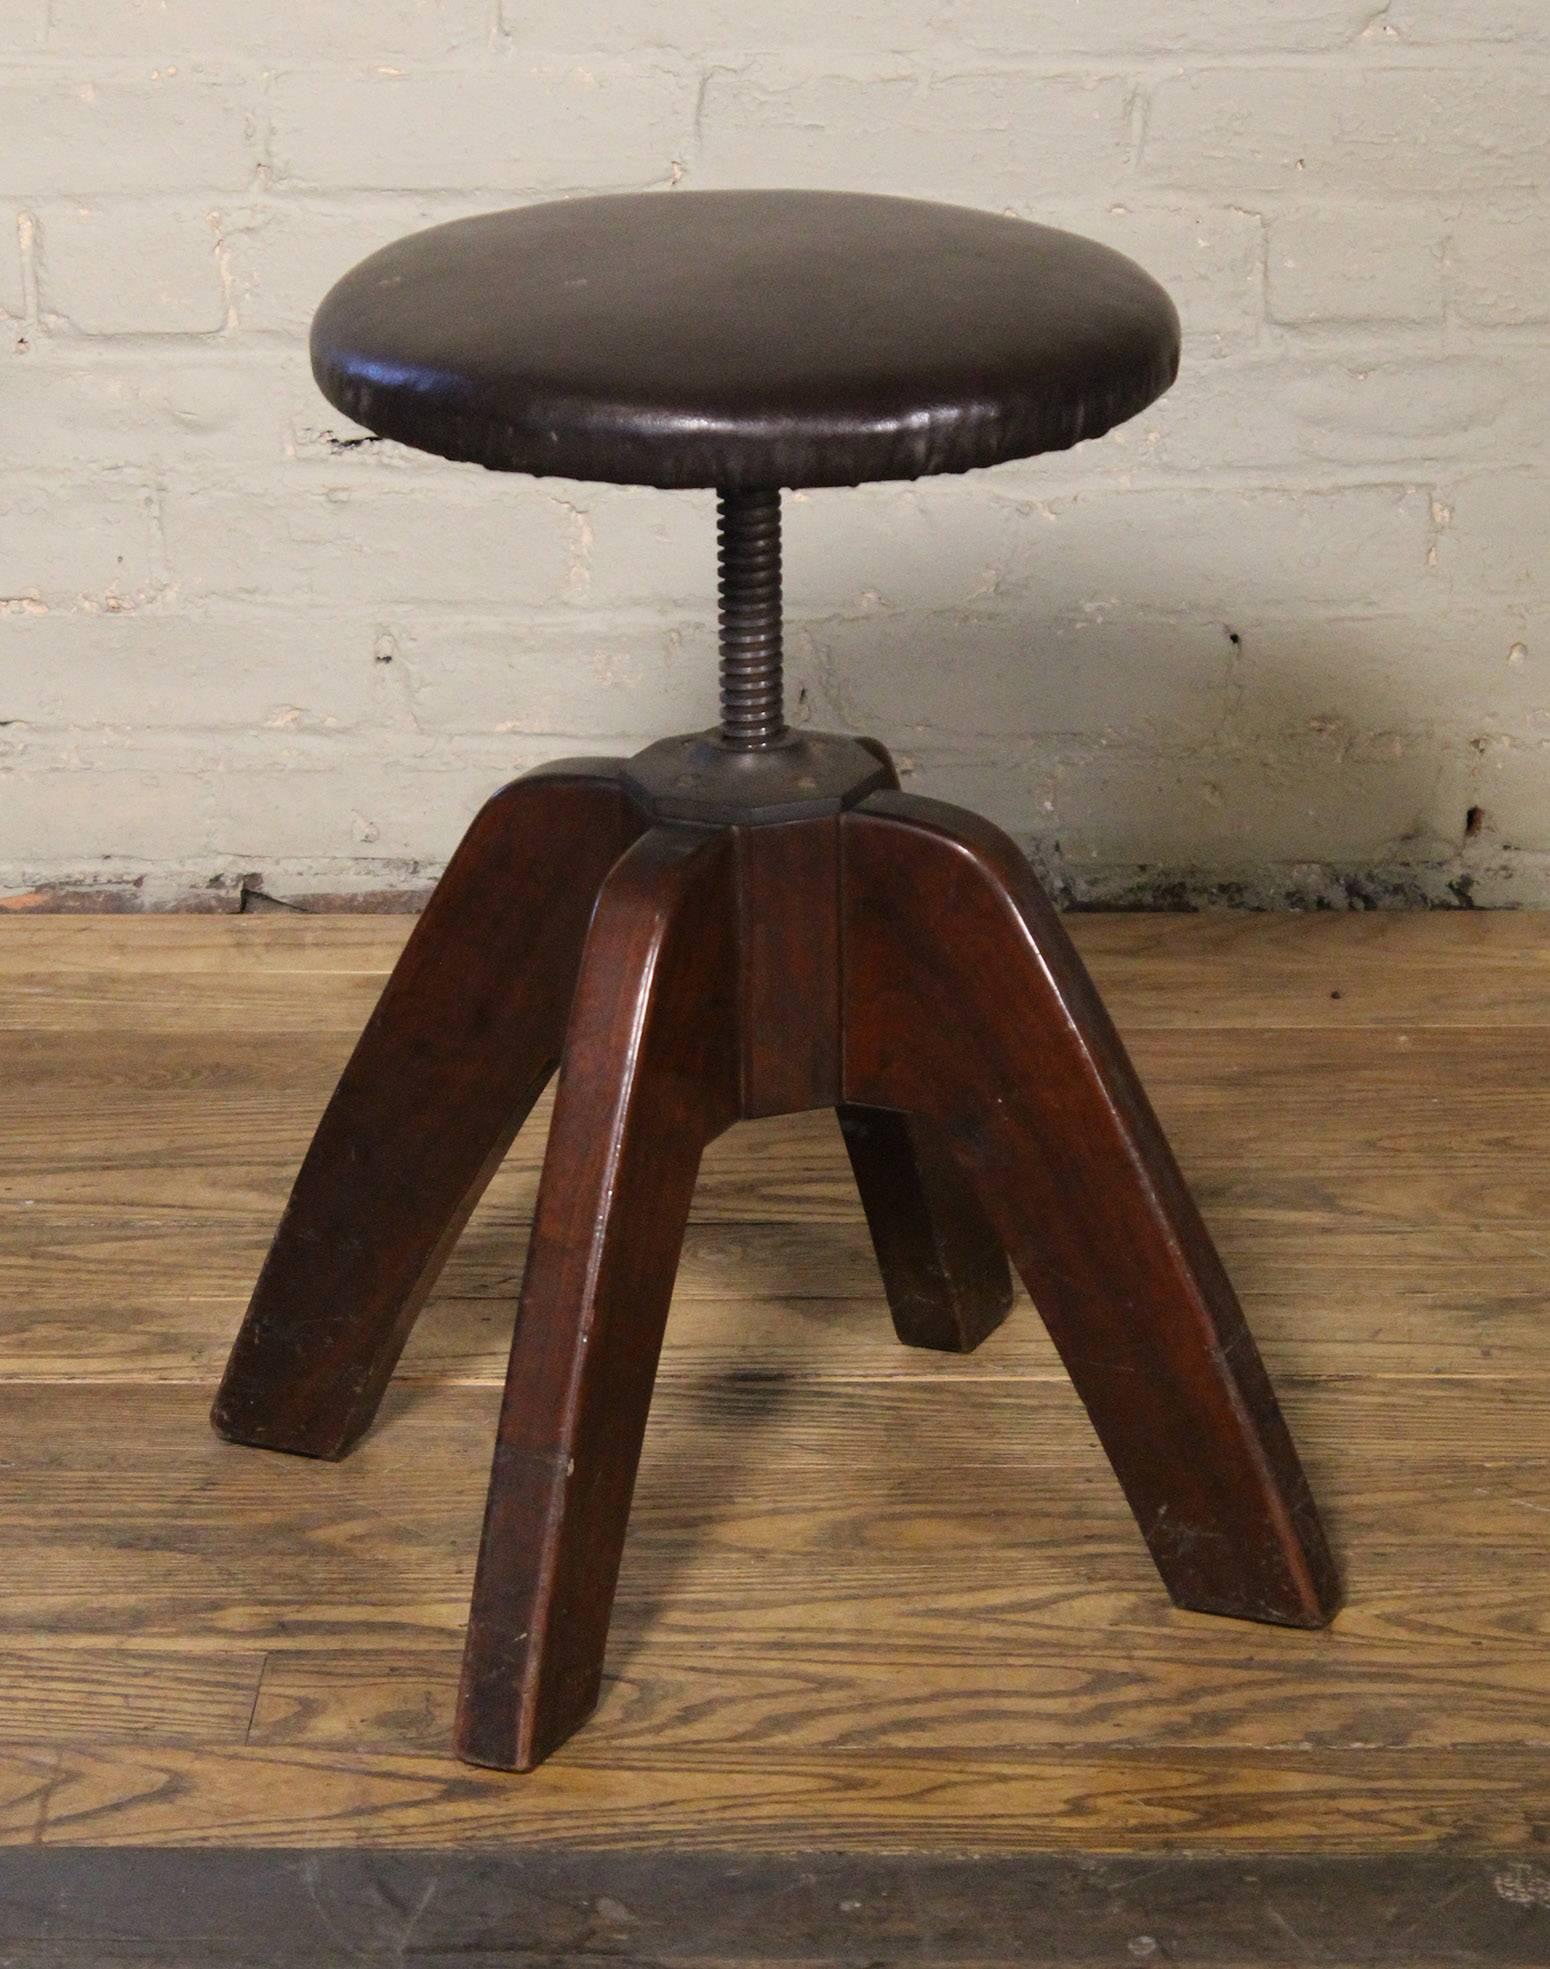 Mid-Century Modern medical, doctor's wood and steel backless adjustable stool by Hamilton. Prouve style legs measure 14 3/4